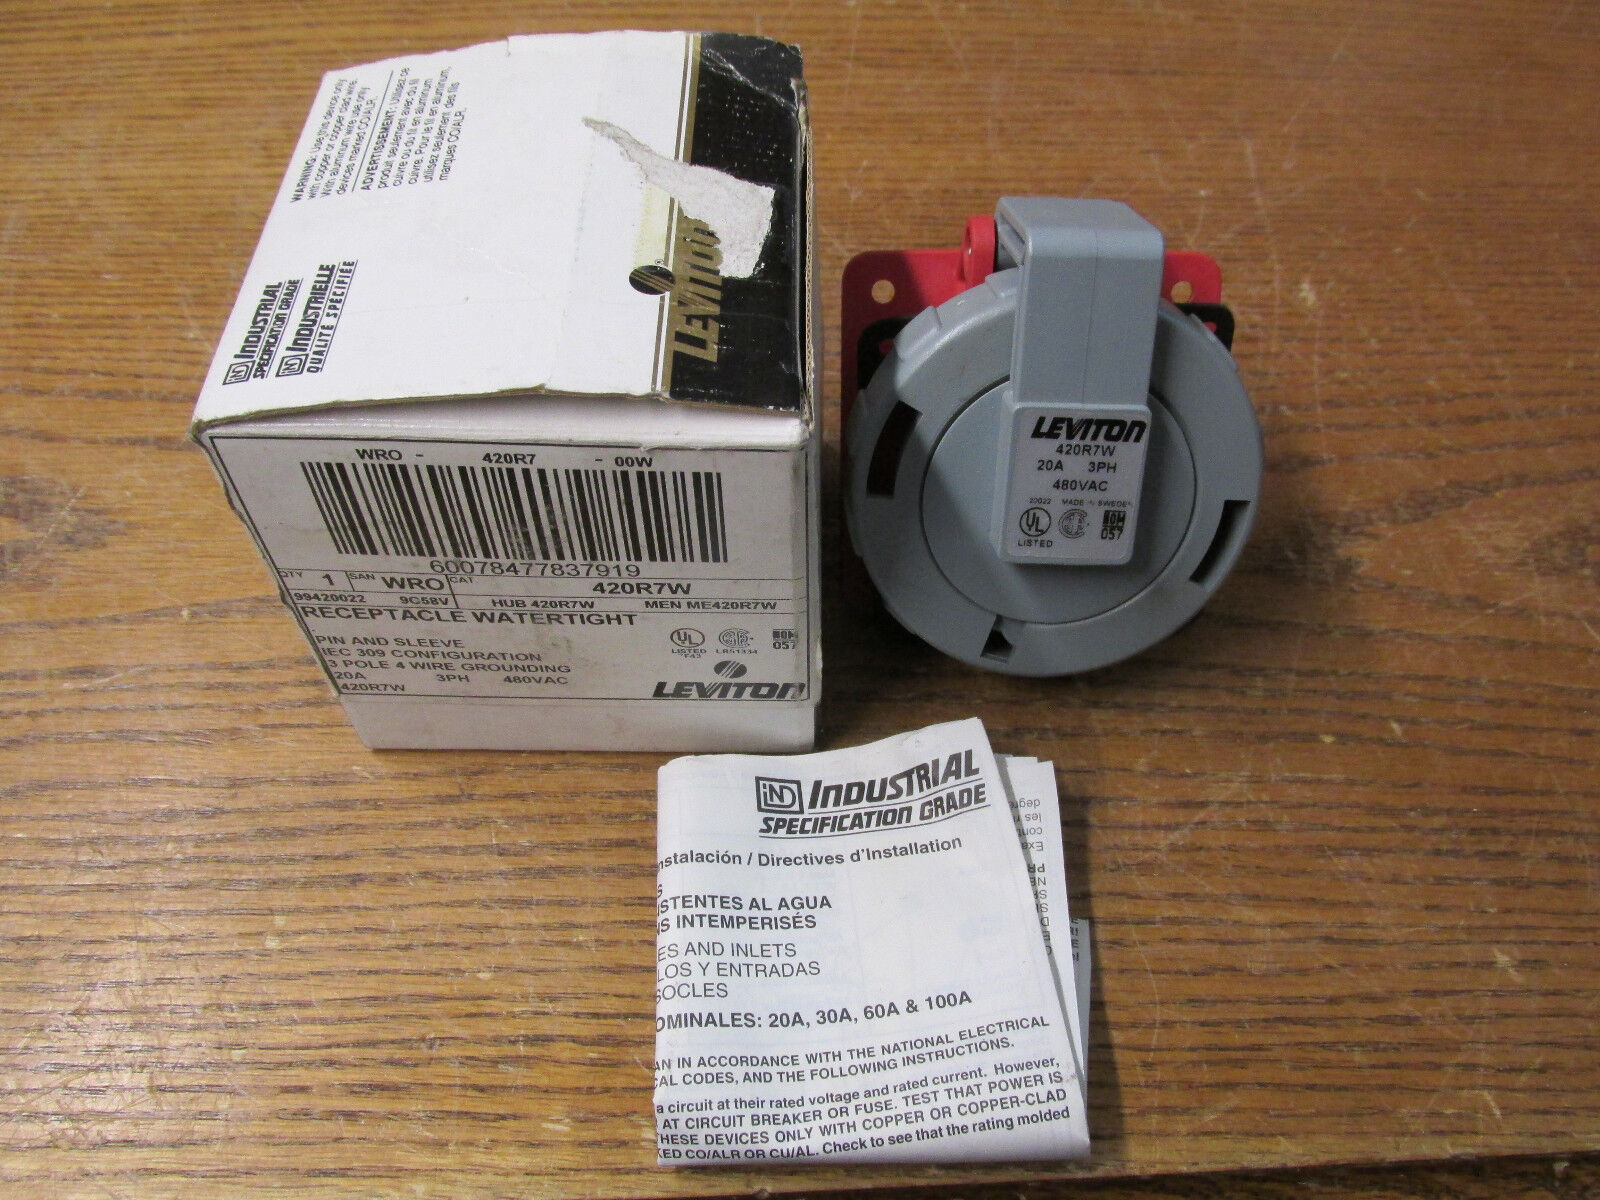 NEW NOS Leviton 420R7W Water Tight Receptacle Pin And Sleeve 20A 480VAC 3PH...